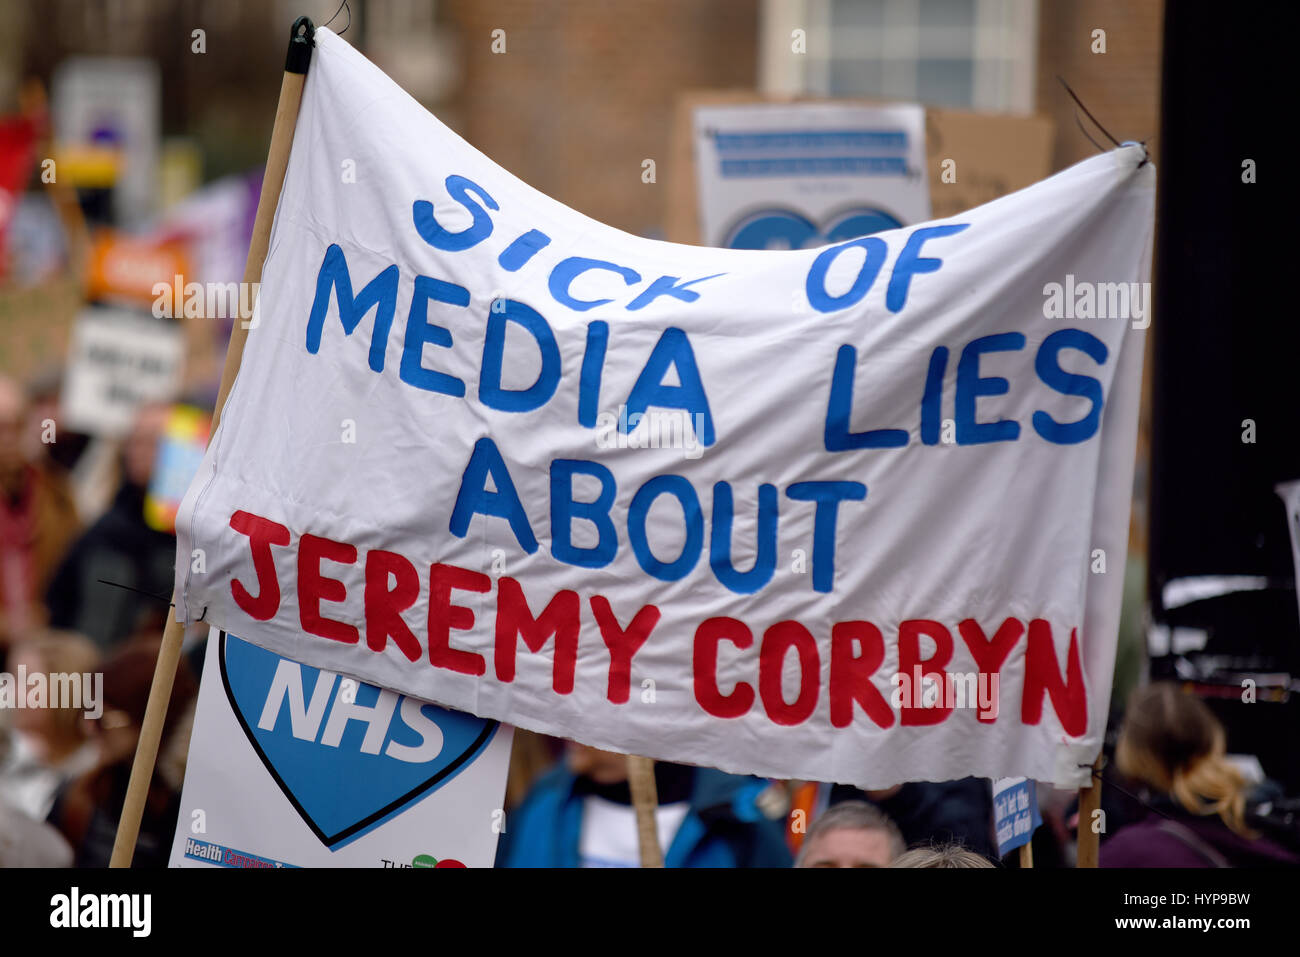 Fake news media lies comment on a banner supporting Jeremy Corbyn stating 'Sick of media lies about Jeremy Corbyn' Stock Photo